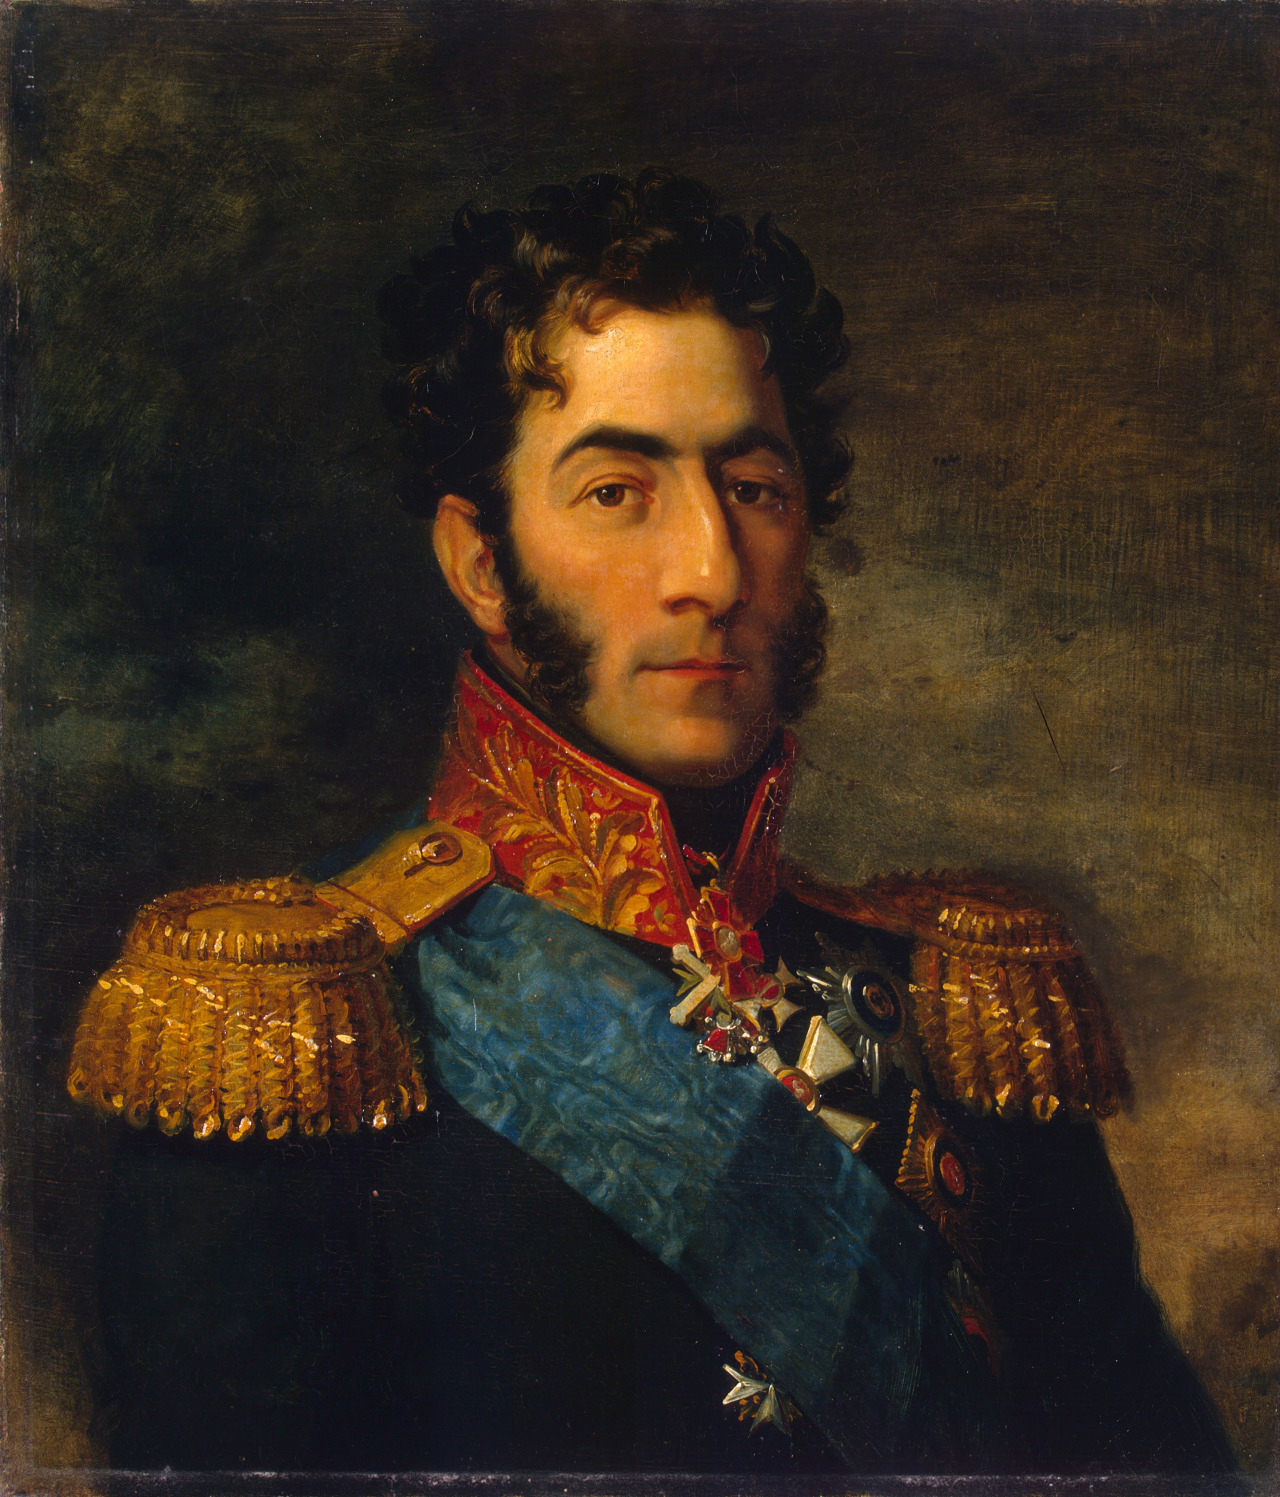 Prince Pyotr Ivanovich Bagration (1765-1812) was a general of the Russian army. He was a descendant of the Georgian royal family of the Bagrations - Painting by George Dawe